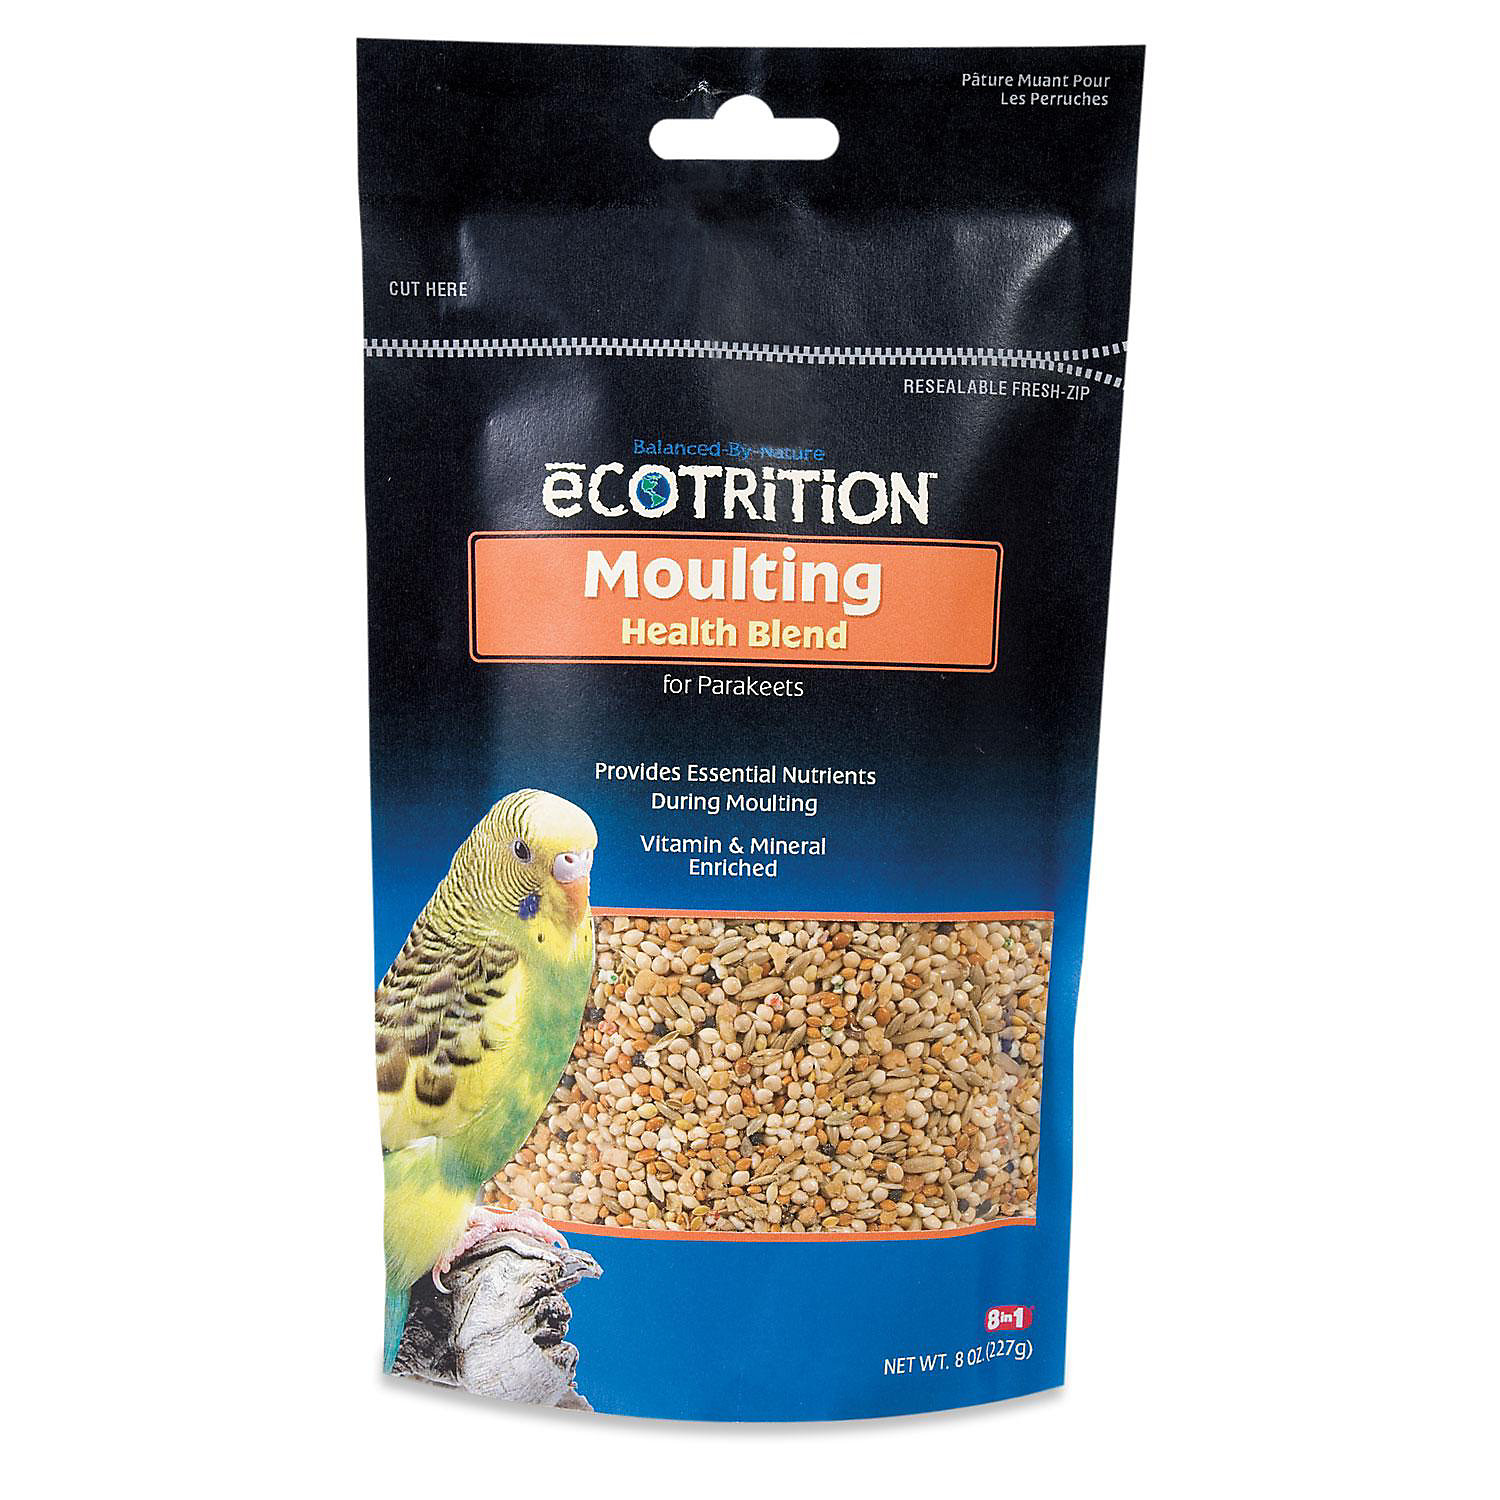 eCOTRITION Moulting Health Blend for Parakeets